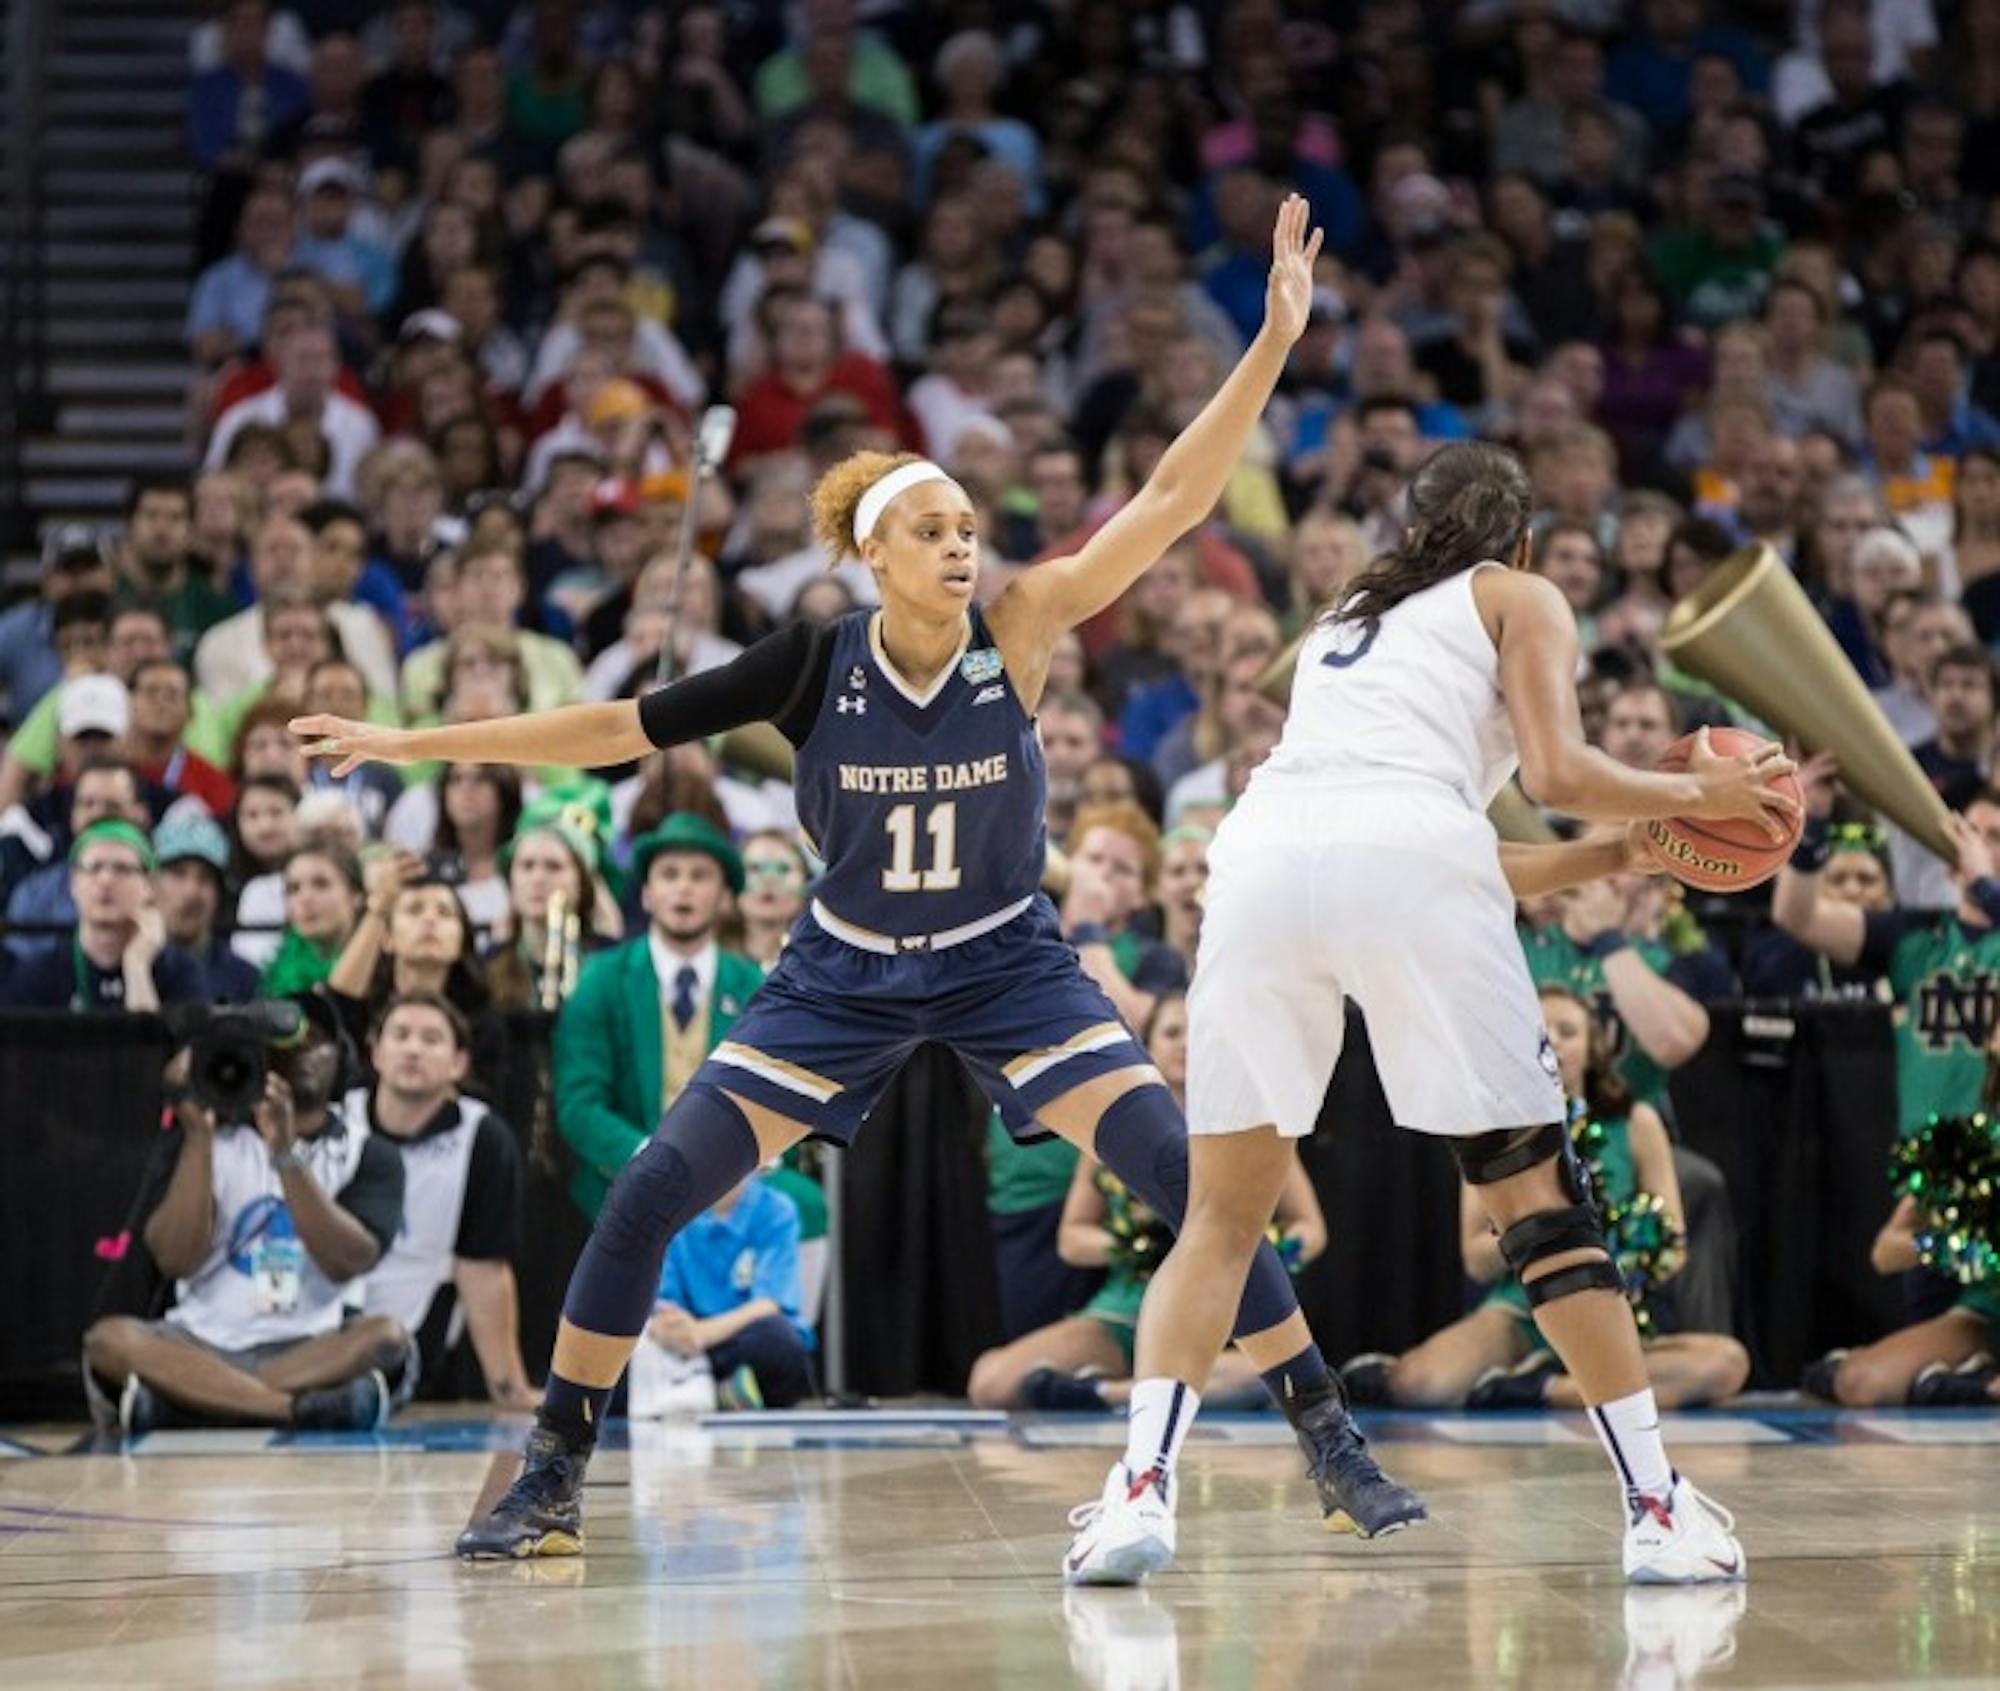 Freshman forward Brianna Turner plays defense during the 63-53 loss to Connecticut on Tuesday night in Tampa.